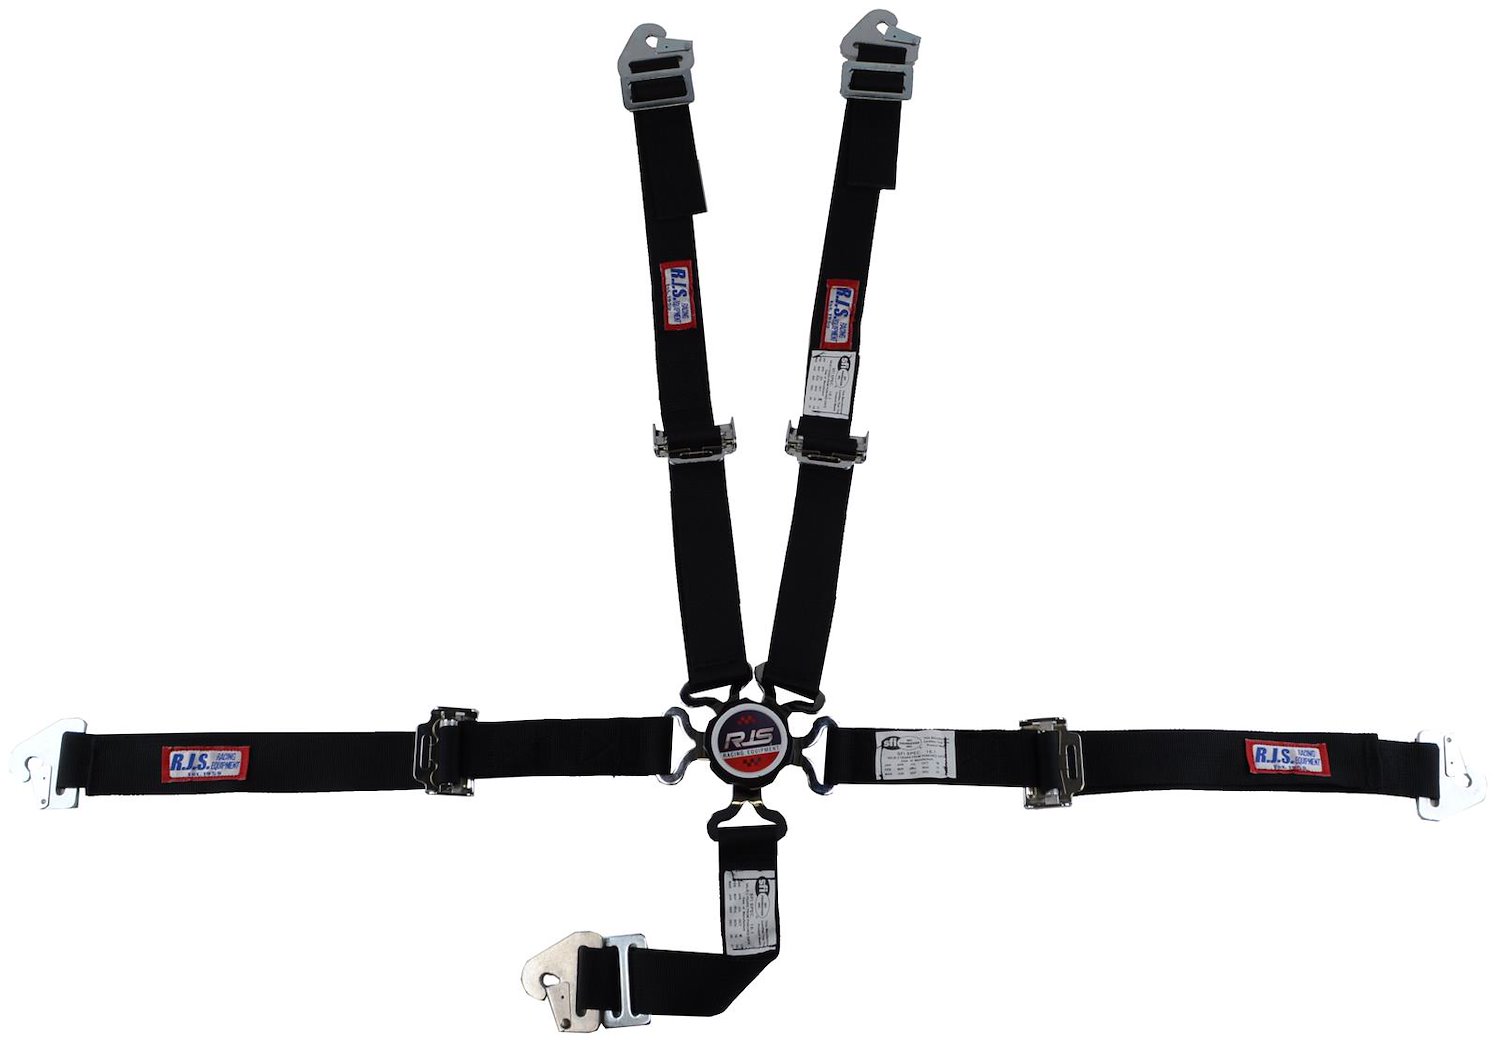 SFI 16.1 CAM-LOCK HARNESS 2 PULL UP Lap Belt 2 Shoulder Harness Individual ROLL BAR Mount 2 DOUBLE Sub ALL WRAP ENDS HOT PINK